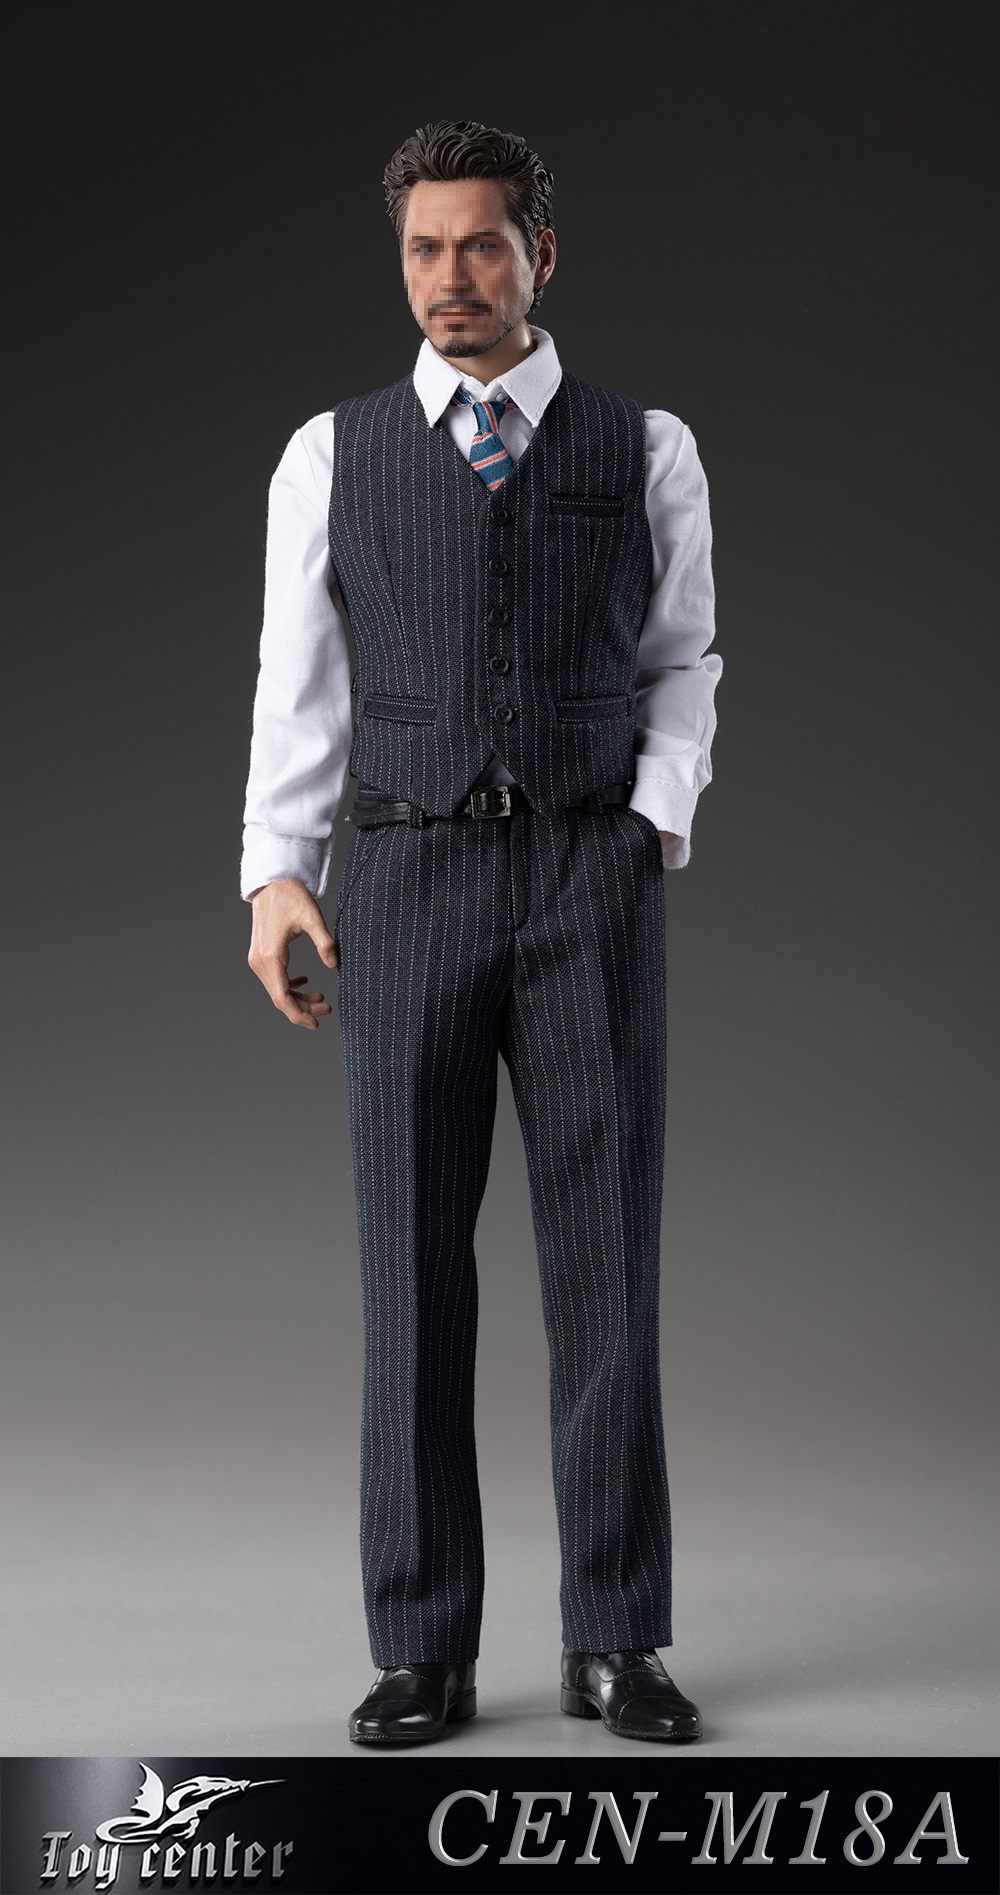 clothing - NEW PRODUCT: Toy center: 1/6 British Gentleman Tony Striped Suit CEN-M18 Three Colors 15522212